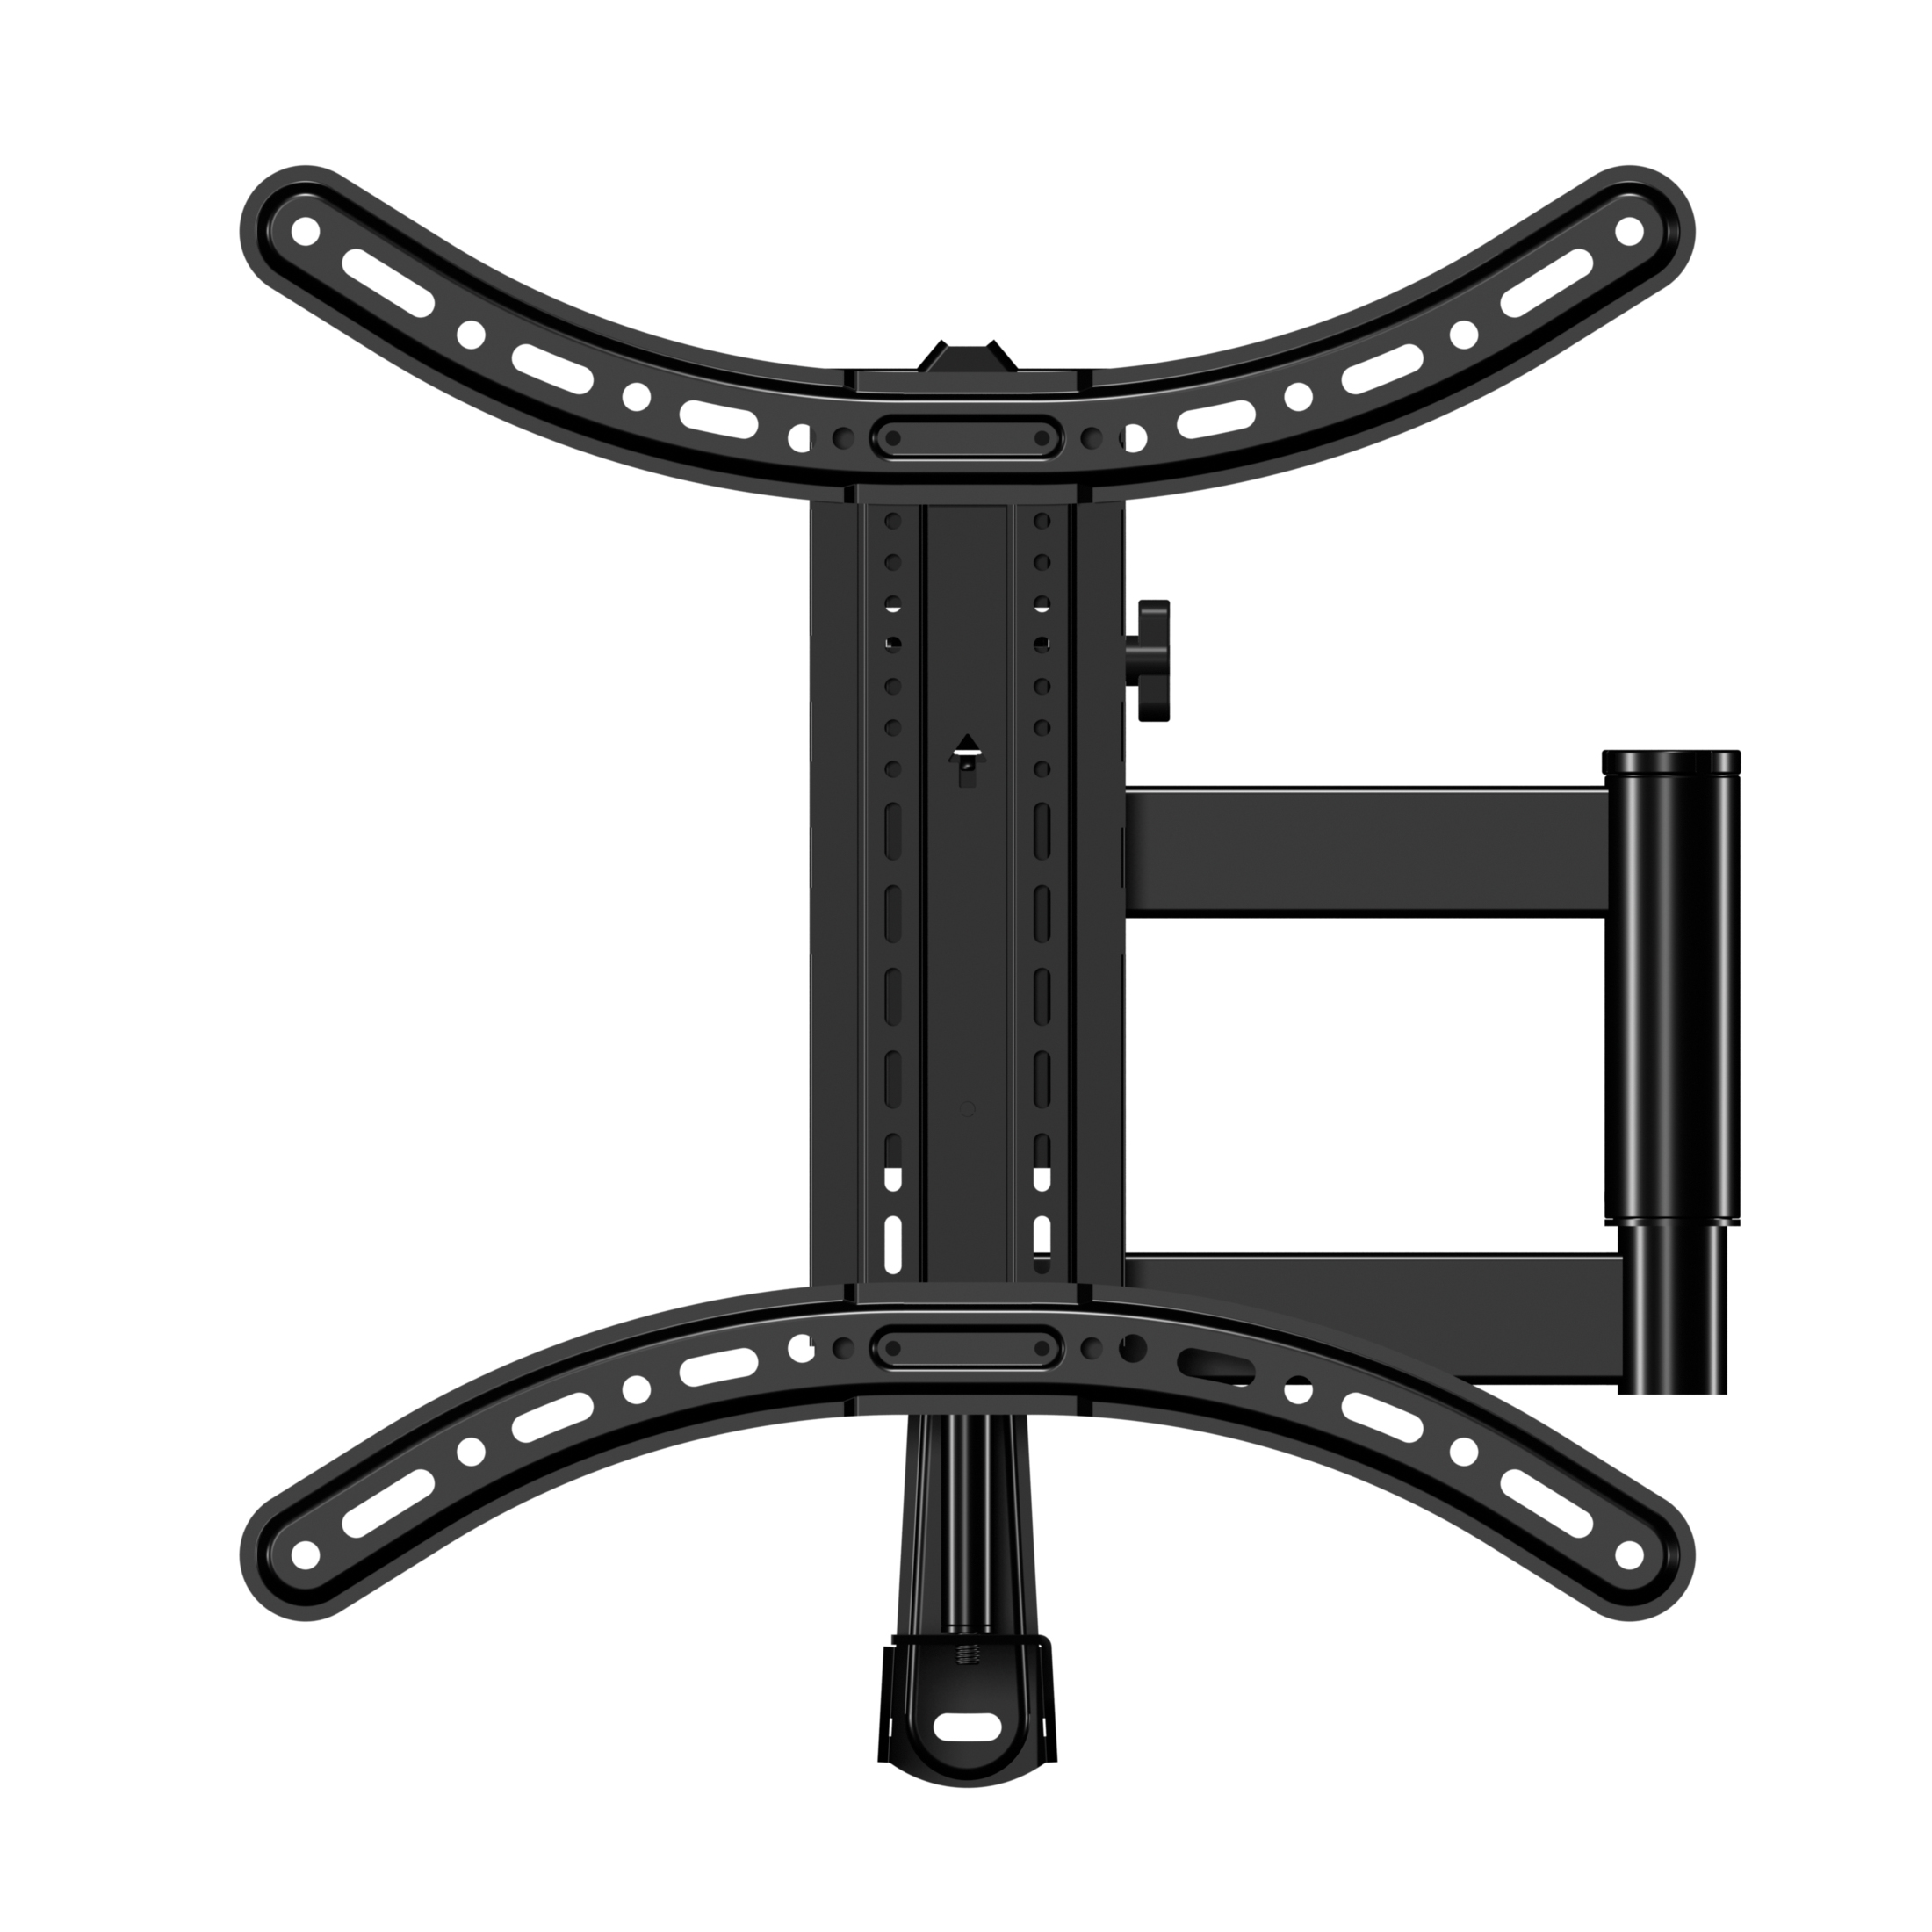 Sanus Vuepoint Full-Motion TV Wall Mount for TVs 32"-55" up to 55lbs - Swivels, Tilts, and Extends up to 18" From the Wall - Comes with 9.8' 4K HDMI Cable - FMF418KIT - image 4 of 14